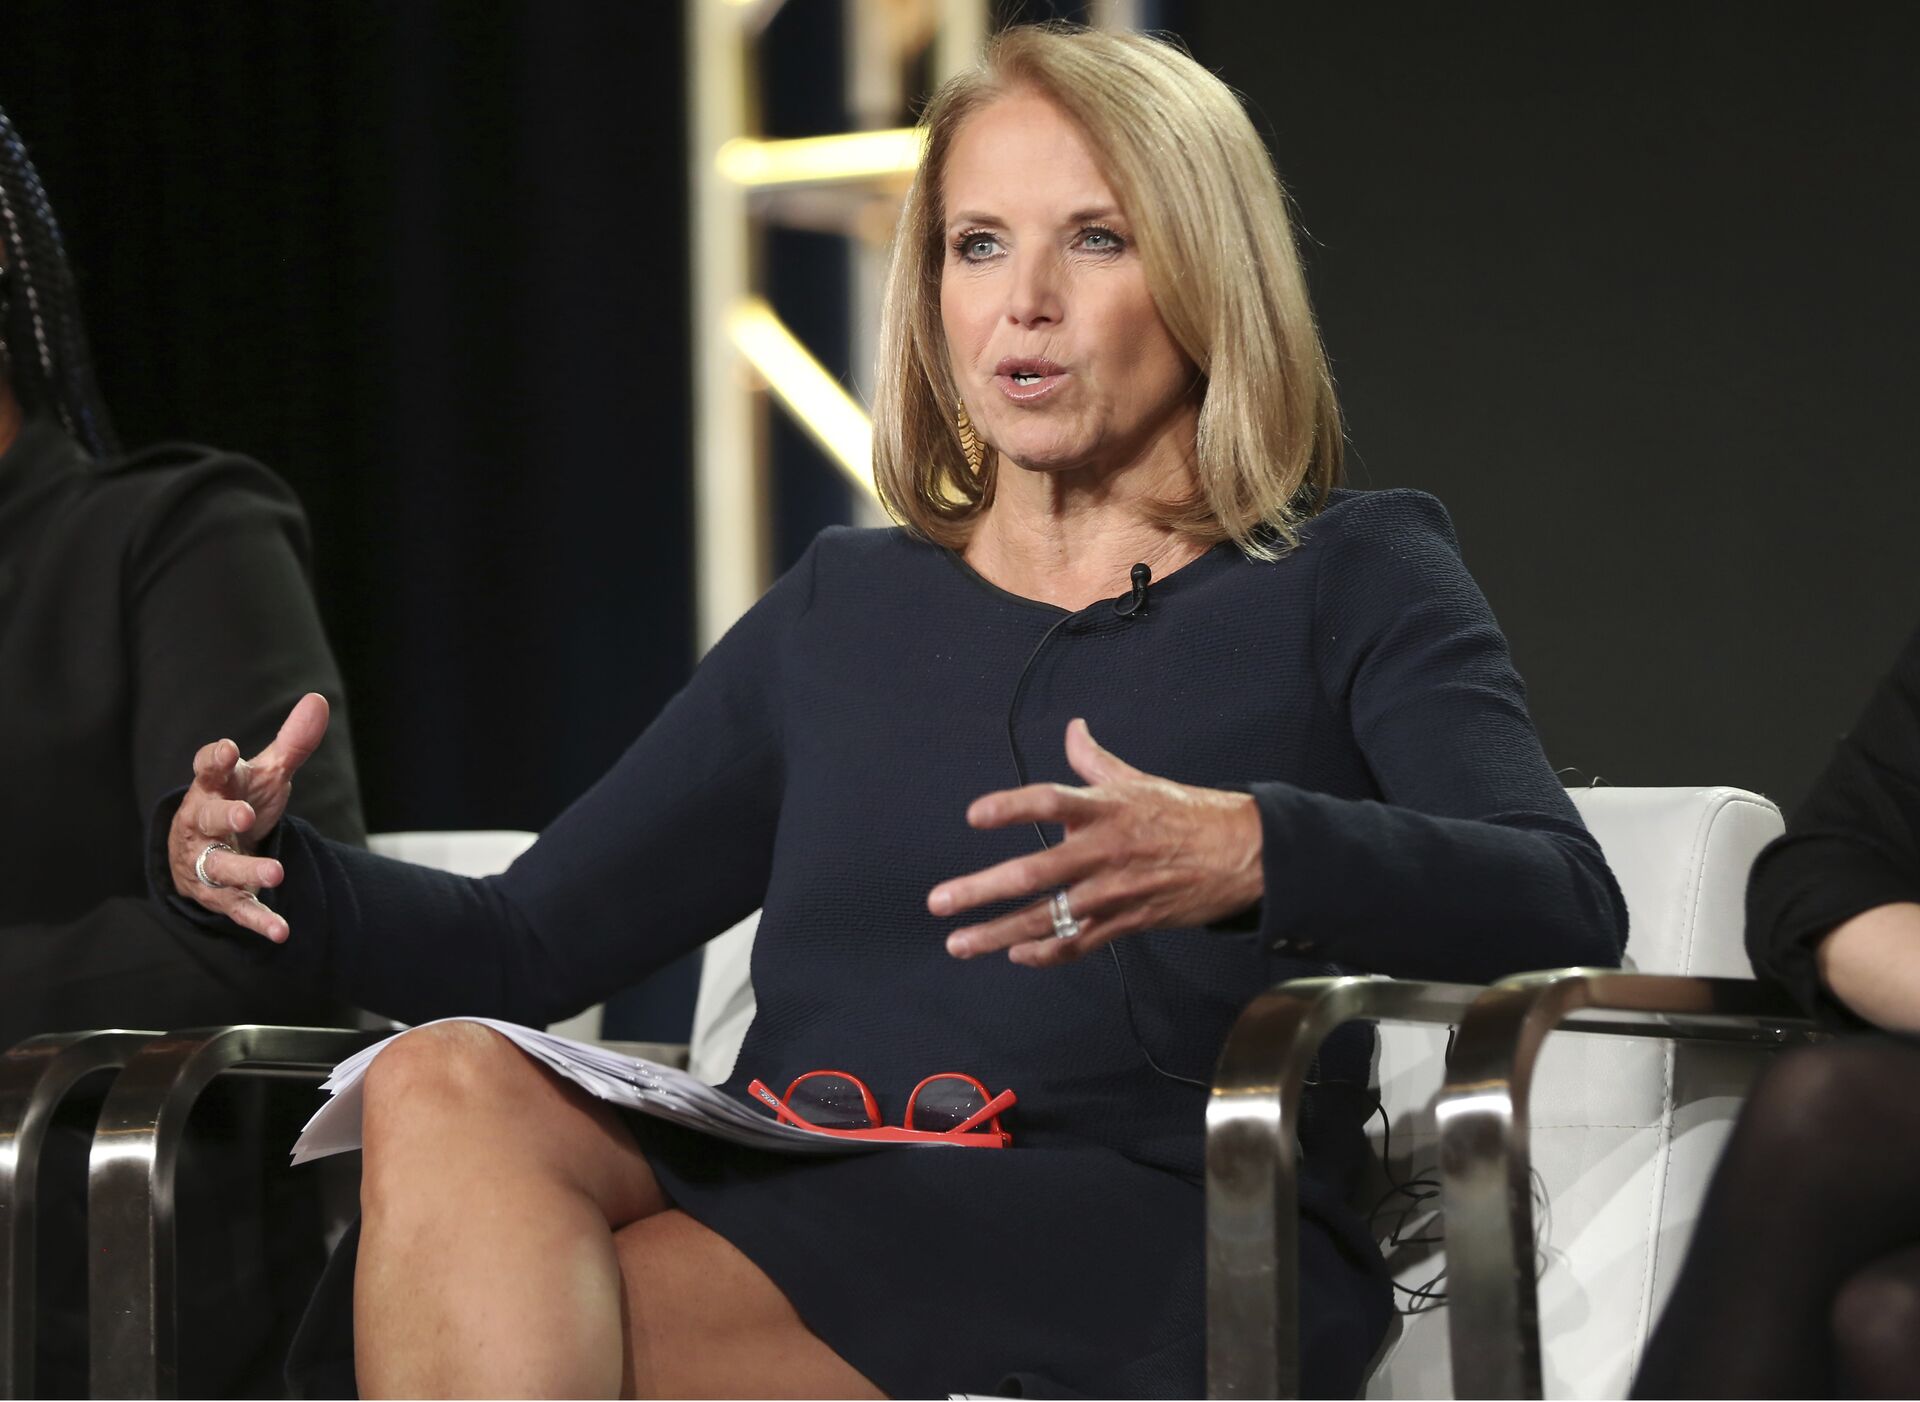 Katie Couric participates in the 'America Inside Out with Katie Kouric' panel during the National Geographic Television Critics Association Winter Press Tour on Saturday, Jan. 13, 2018, in Pasadena, Calif. - Sputnik International, 1920, 13.10.2021